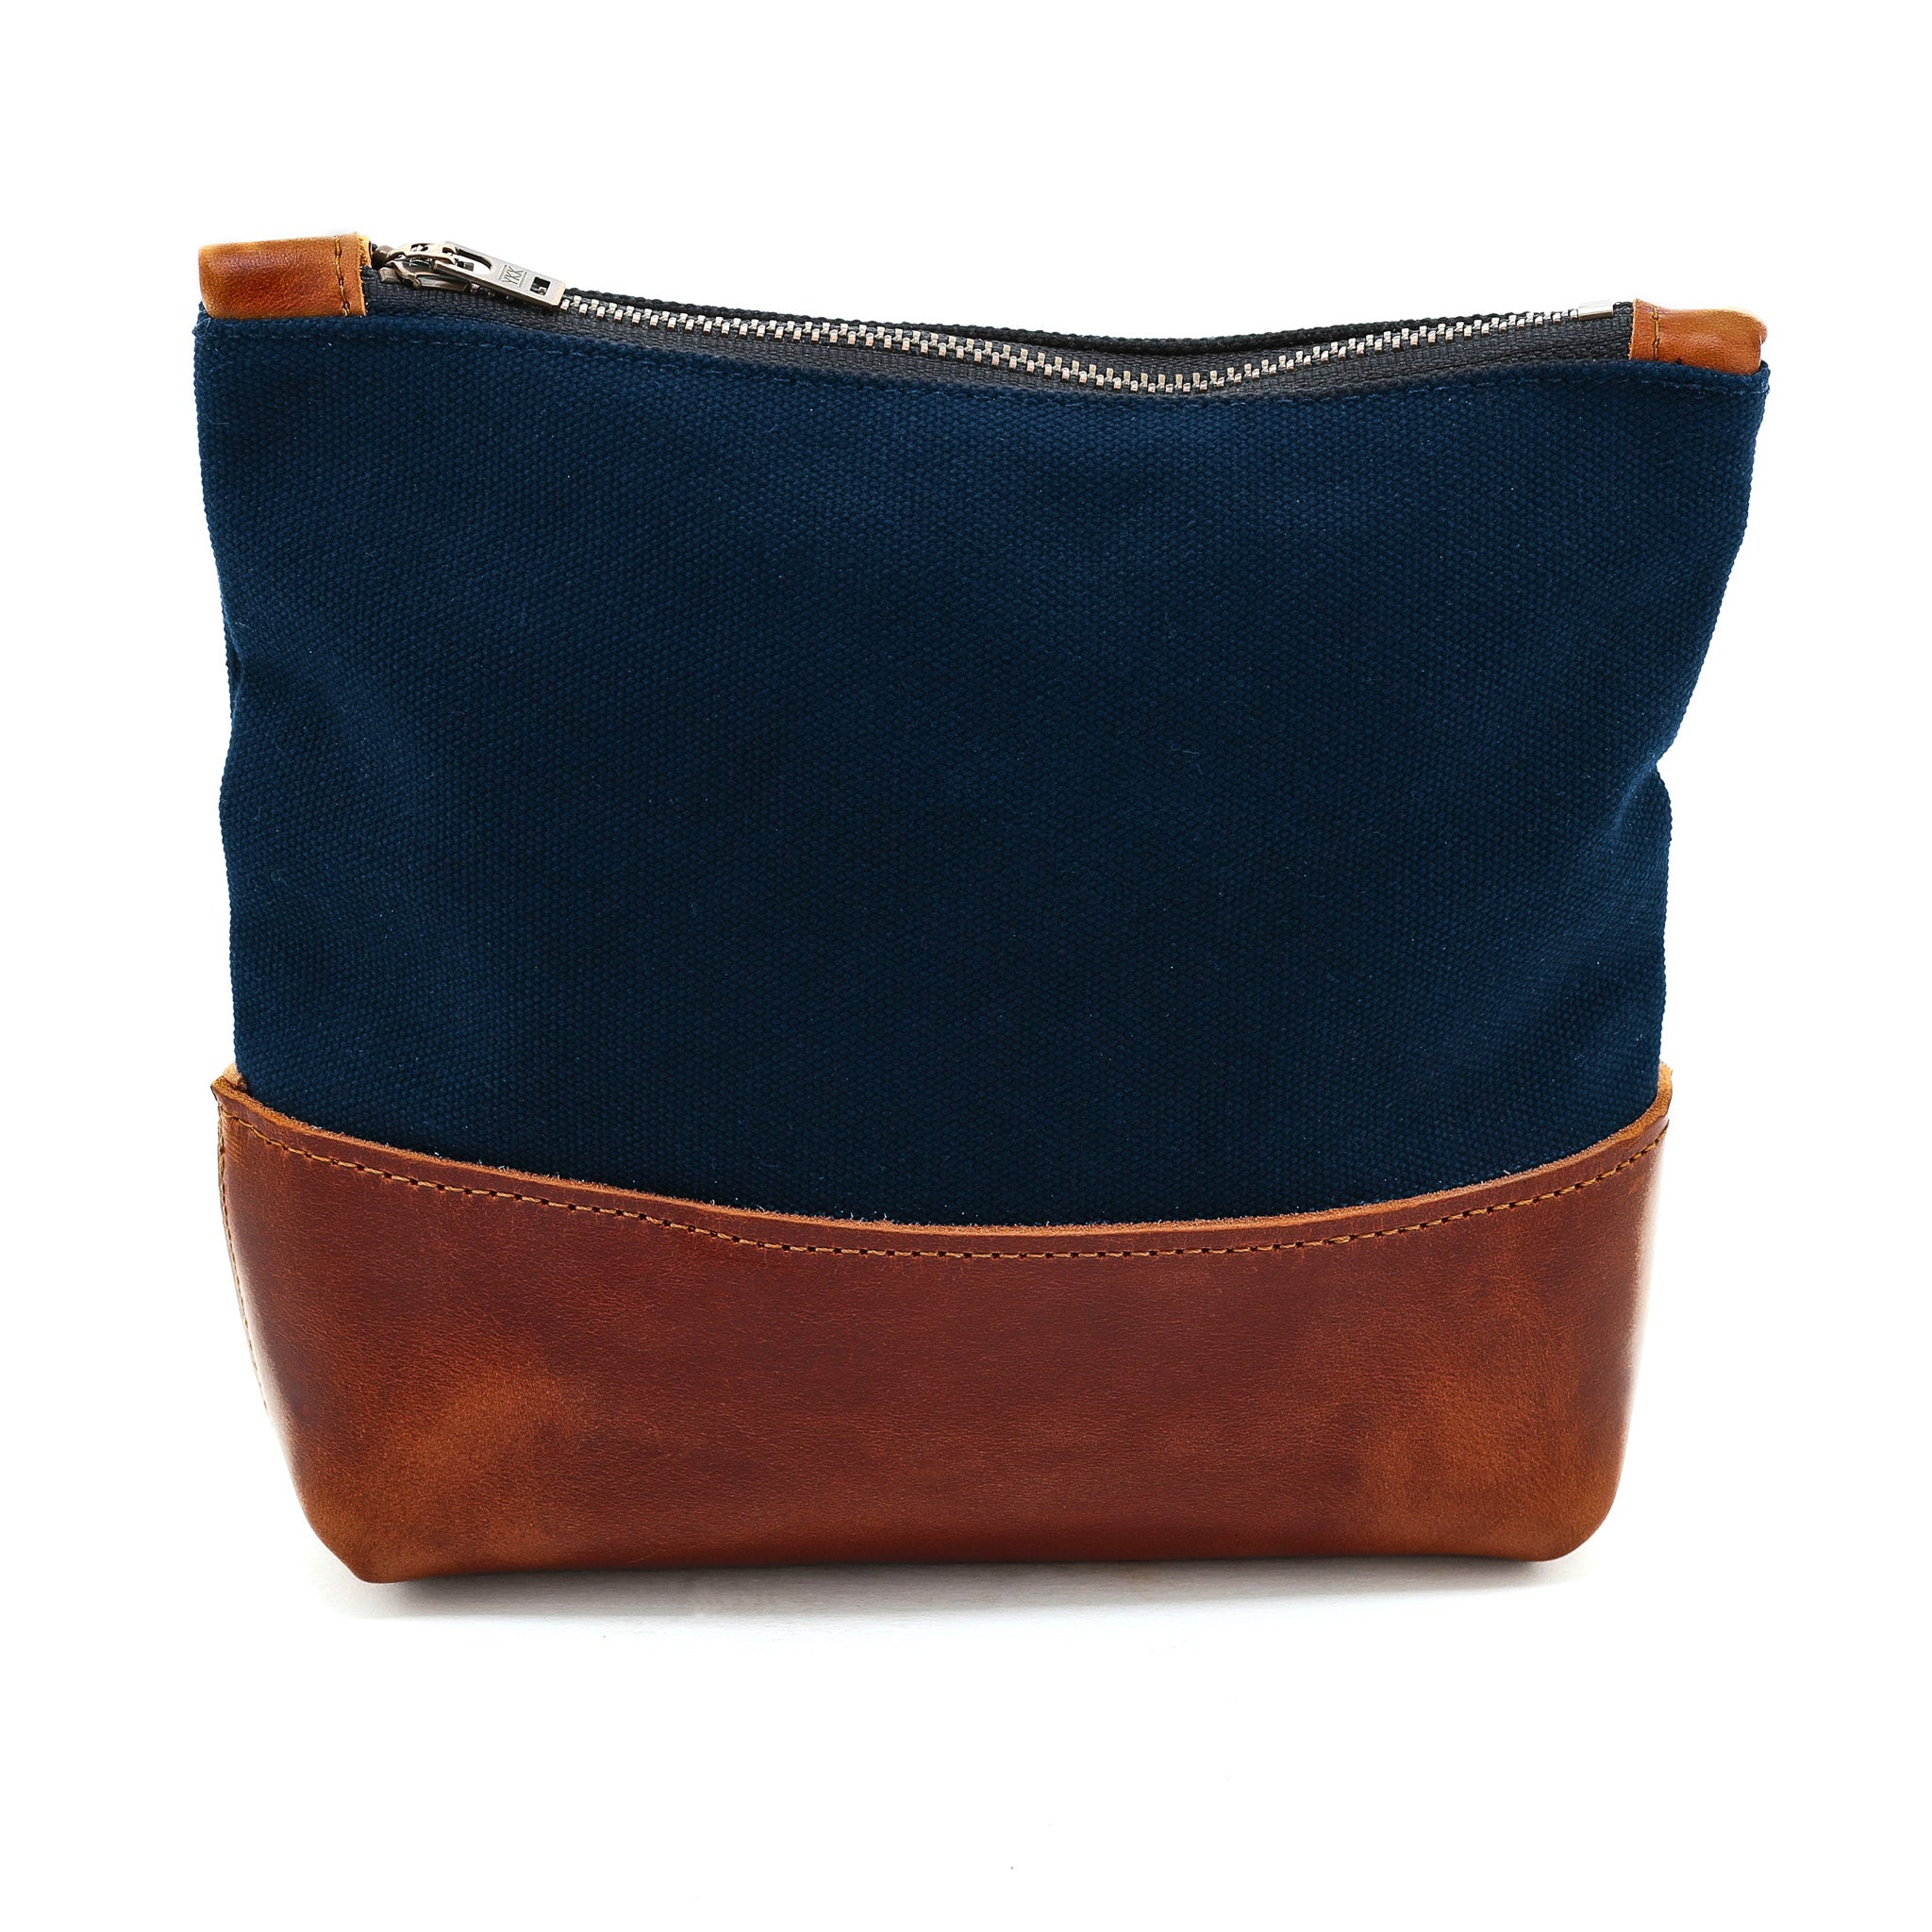 Acadia Pouch Navy/Chicago Tan